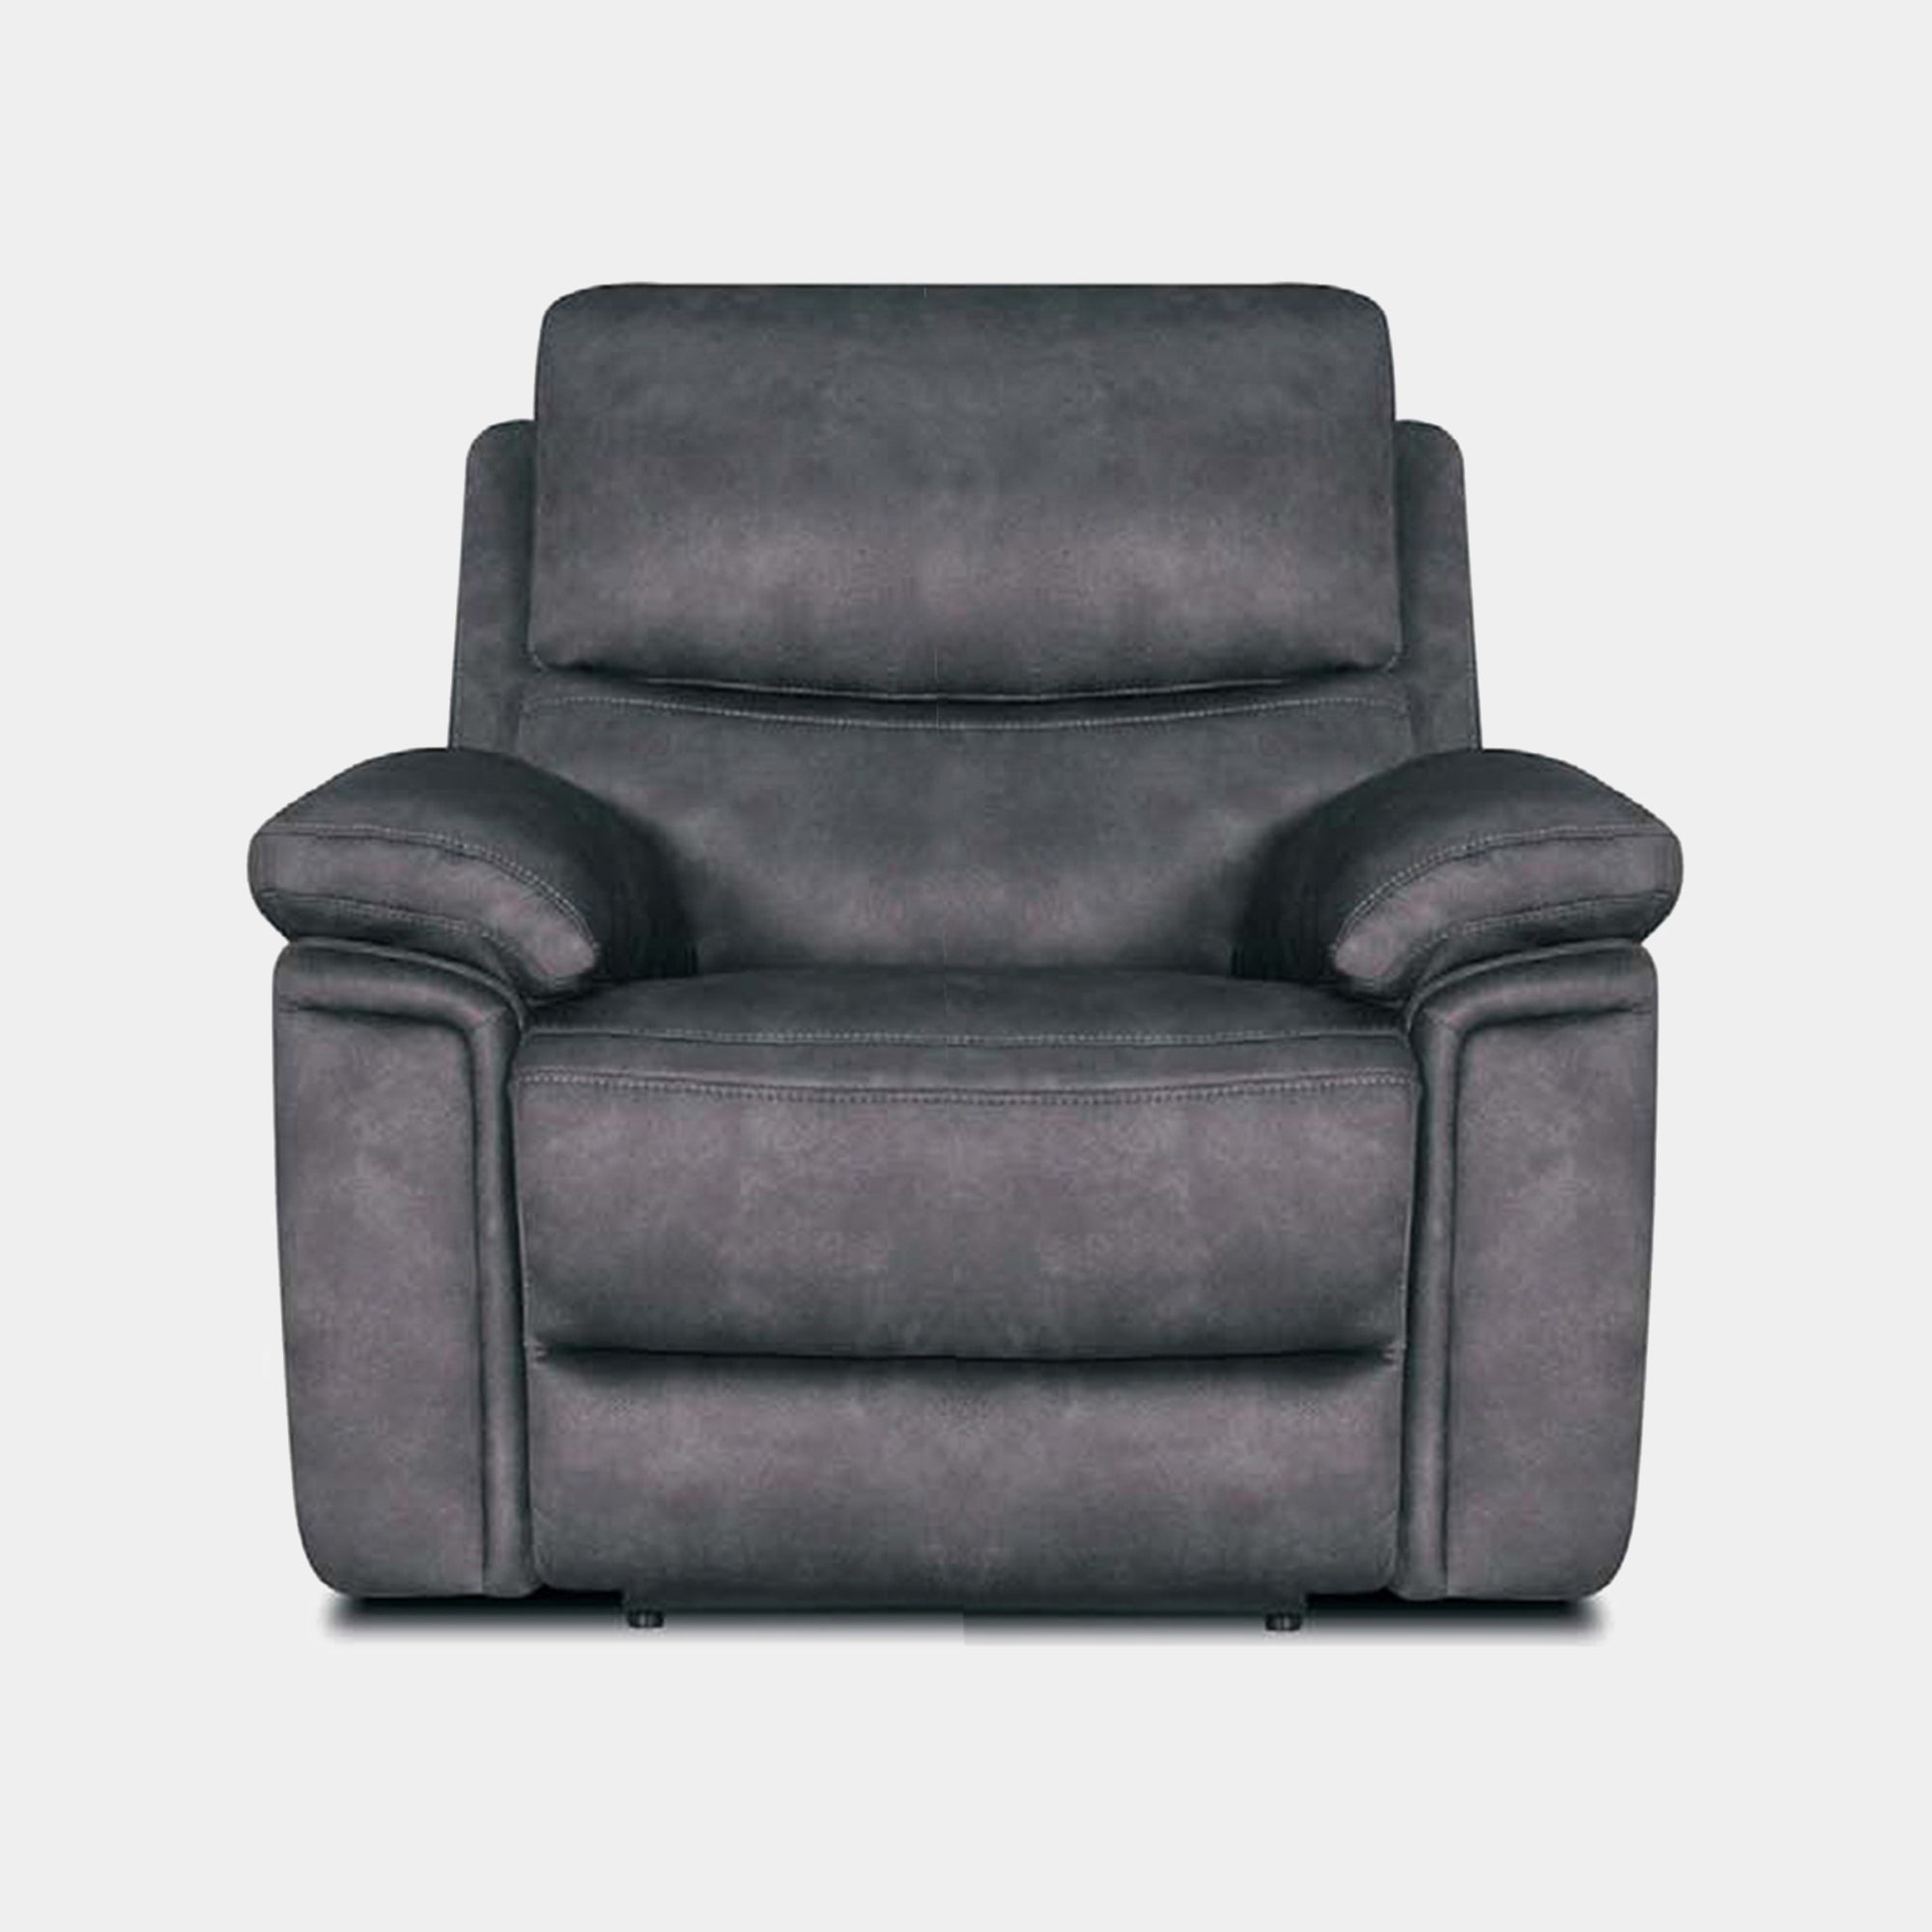 Tampa - Chair In Fabric Or Leather Fabric Grade BSF20